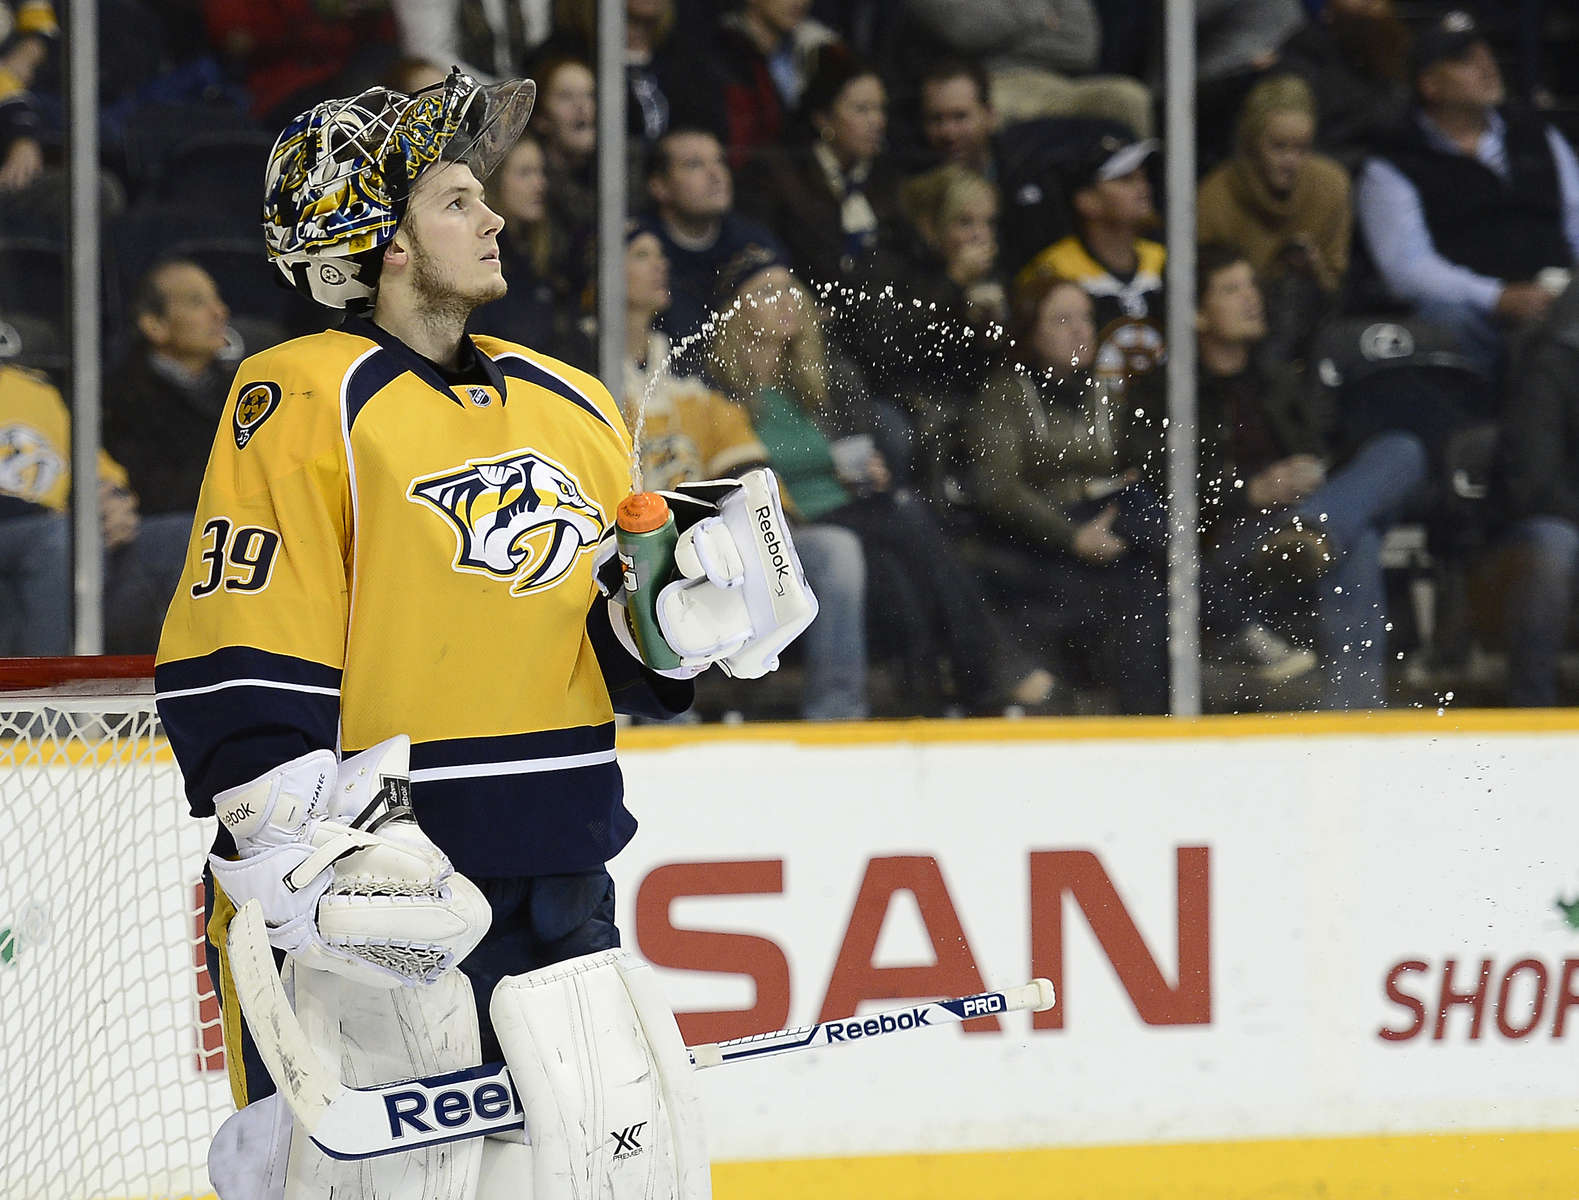 Nashville Predators goalie Marek Mazanec squirts water out of his bottle after allowing a goal against the Boston Bruins in the third period of an NHL hockey game on Dec. 23, 2013, in Nashville, Tenn. The Bruins won 6-2. (AP Photo/Mark Zaleski)